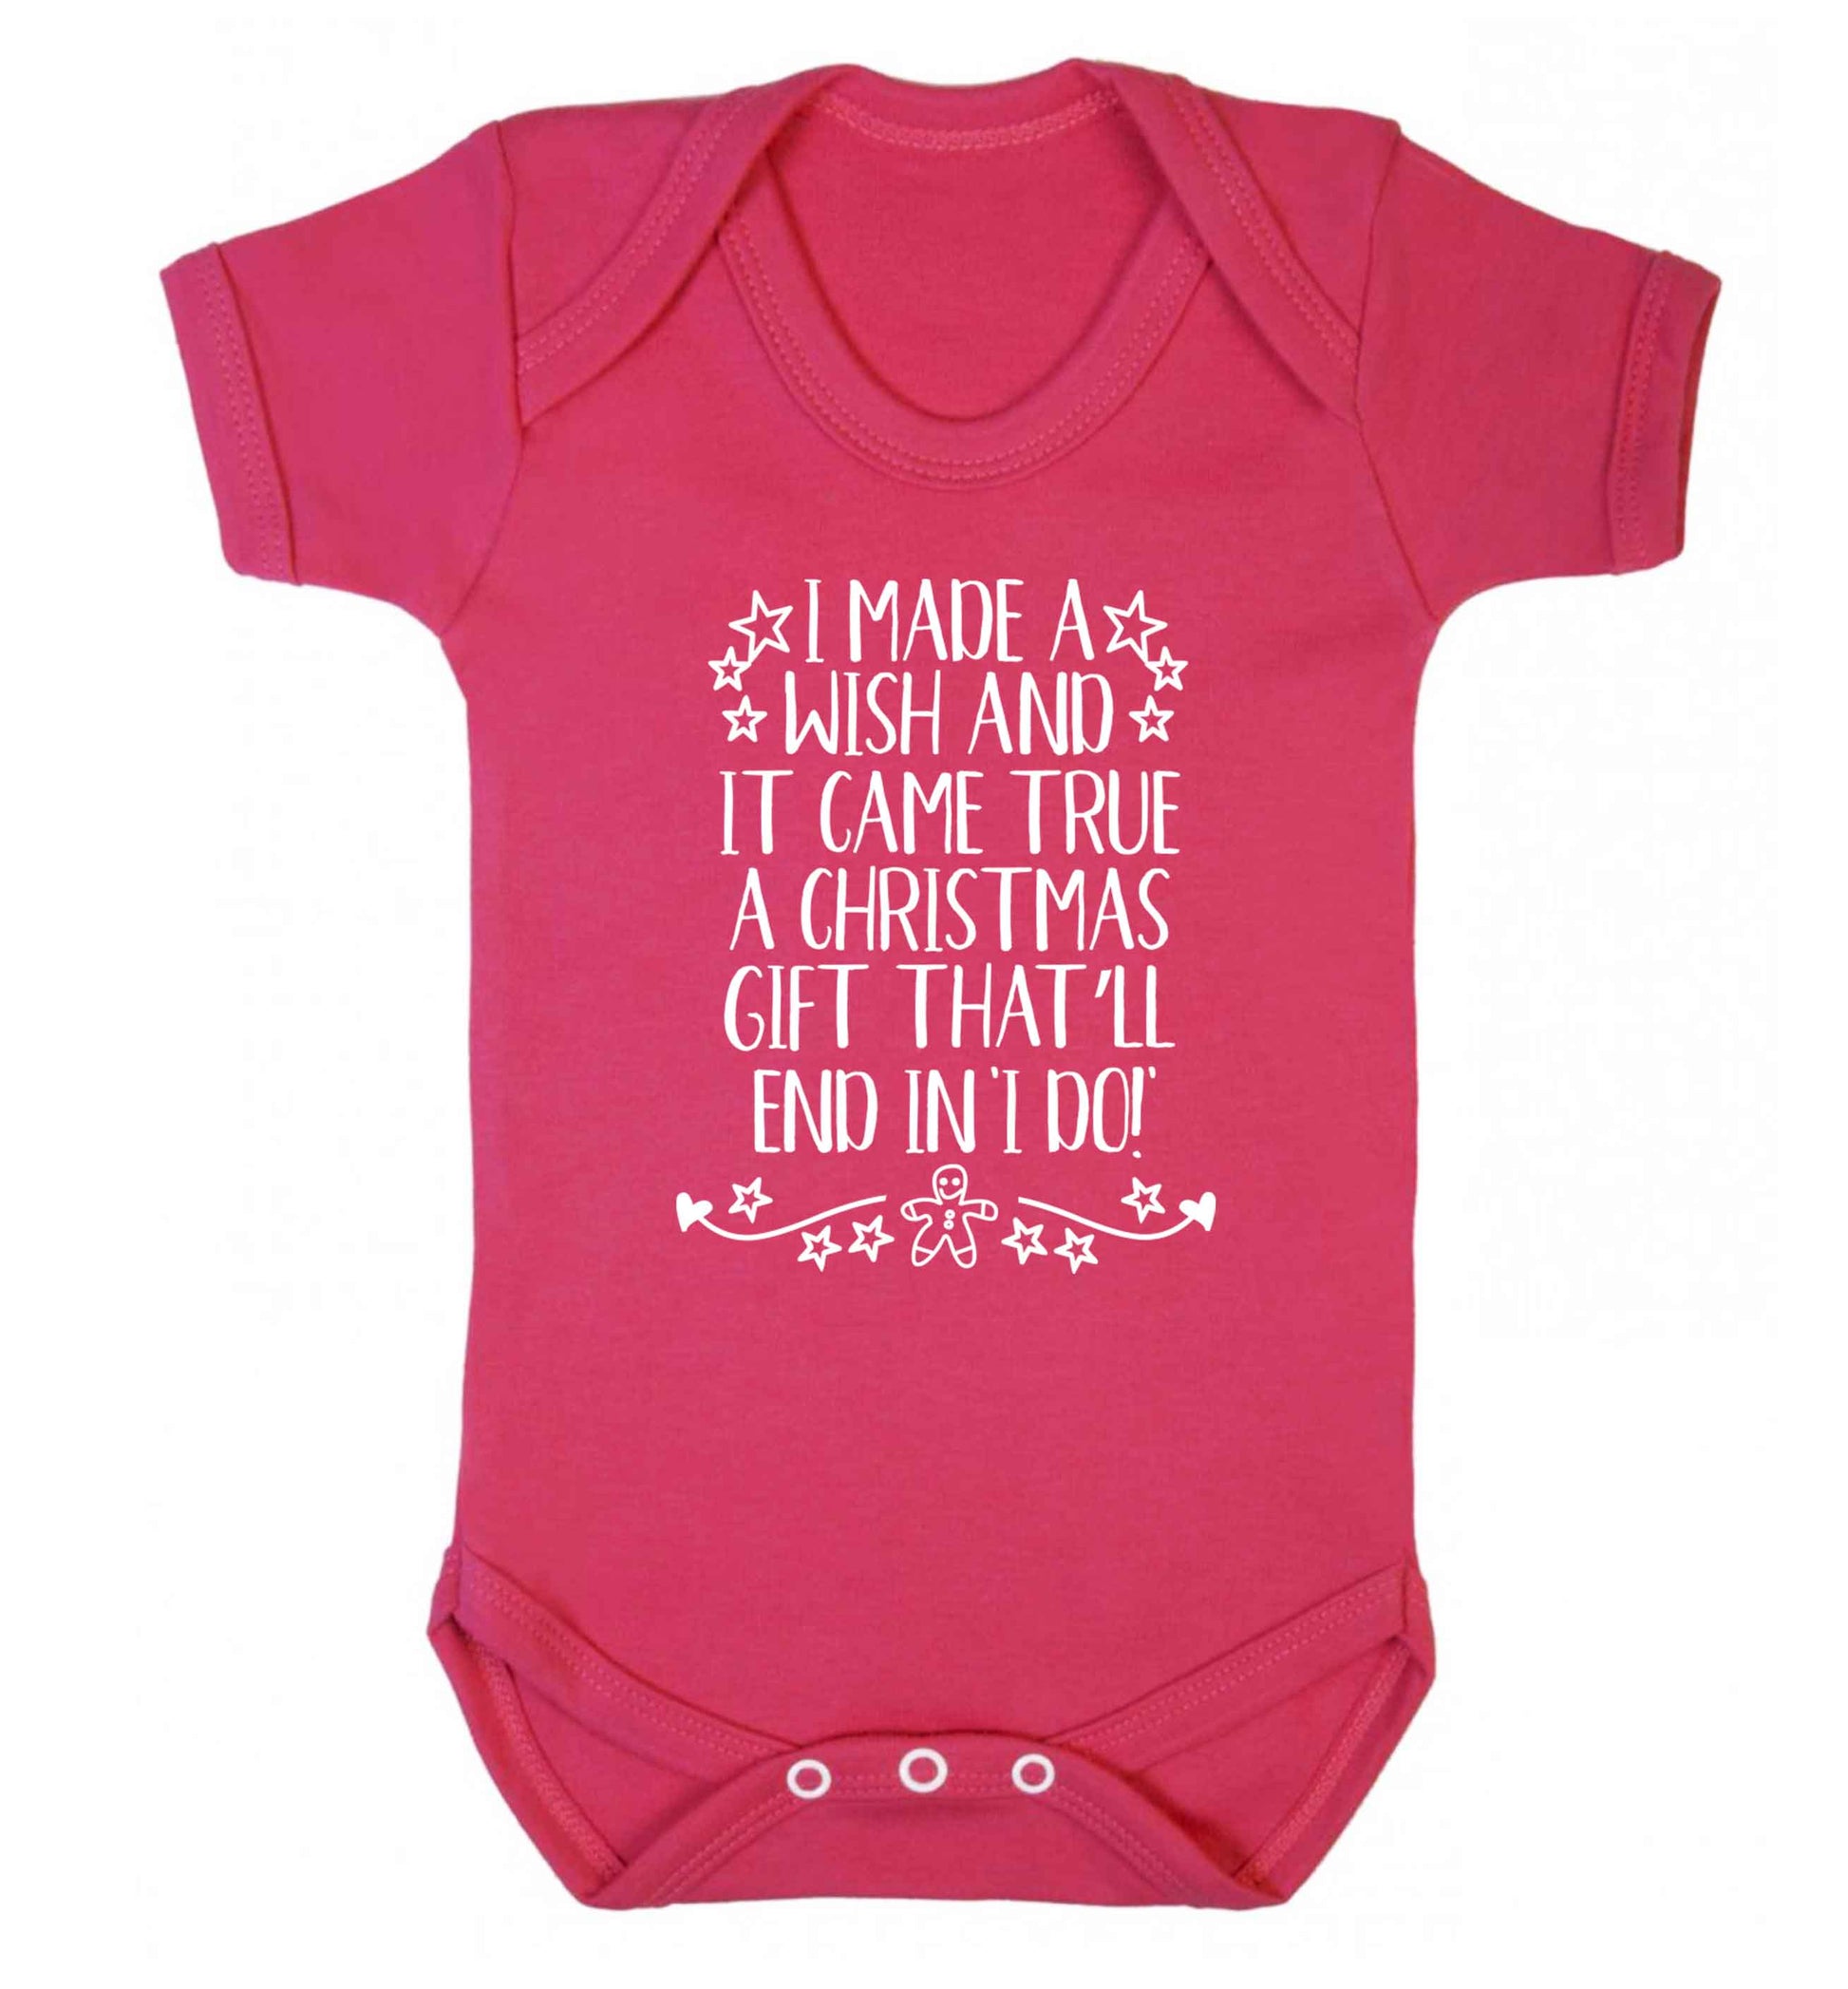 I made a wish and it came true a Christmas gift that'll end in 'I do' Baby Vest dark pink 18-24 months